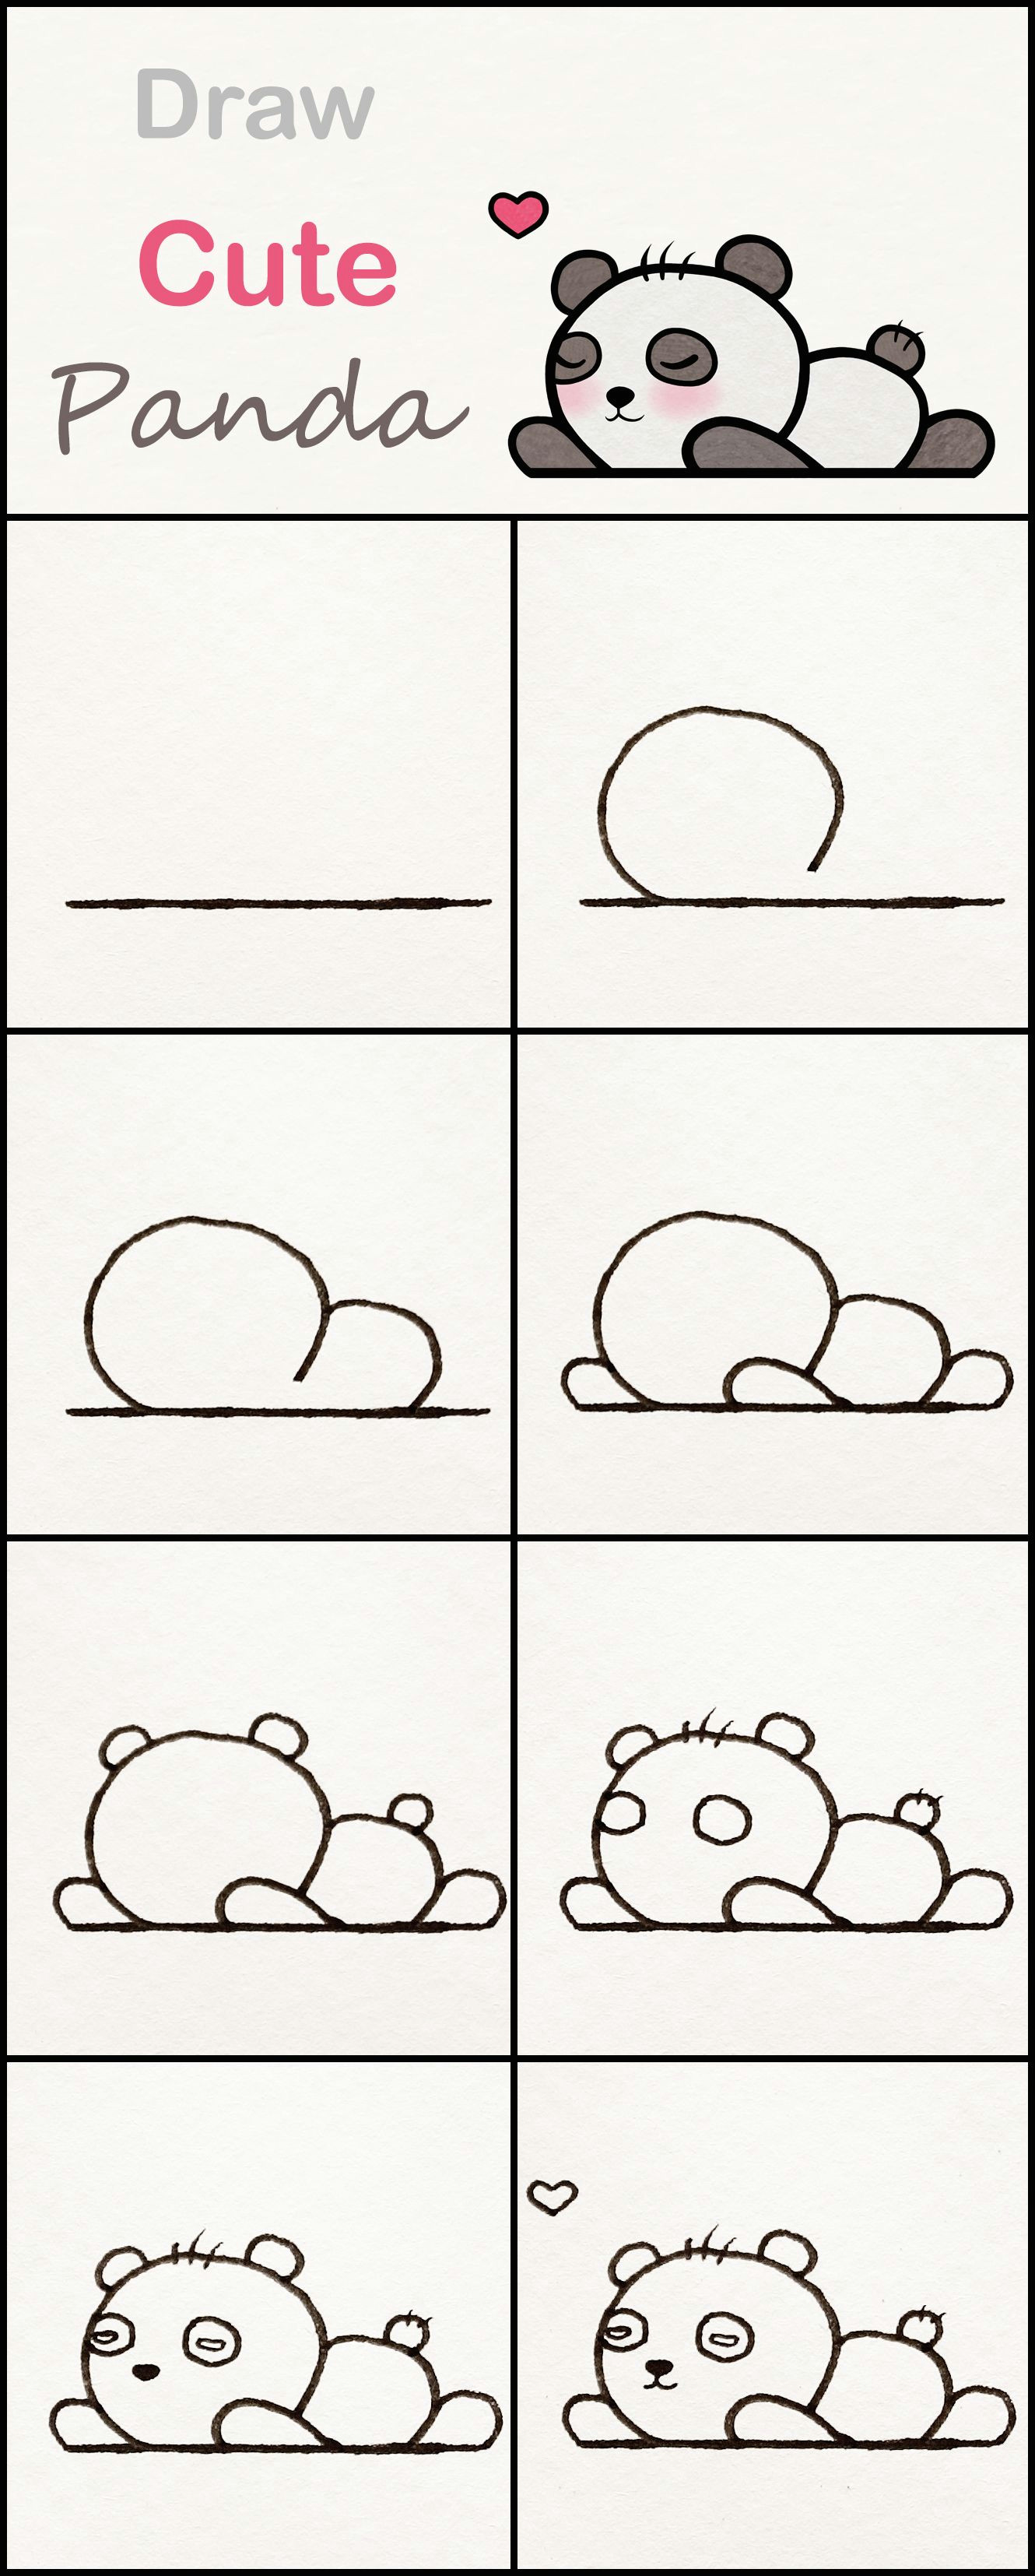 Easy Drawing Van Learn How to Draw A Cute Baby Panda Step by Step A Very Simple